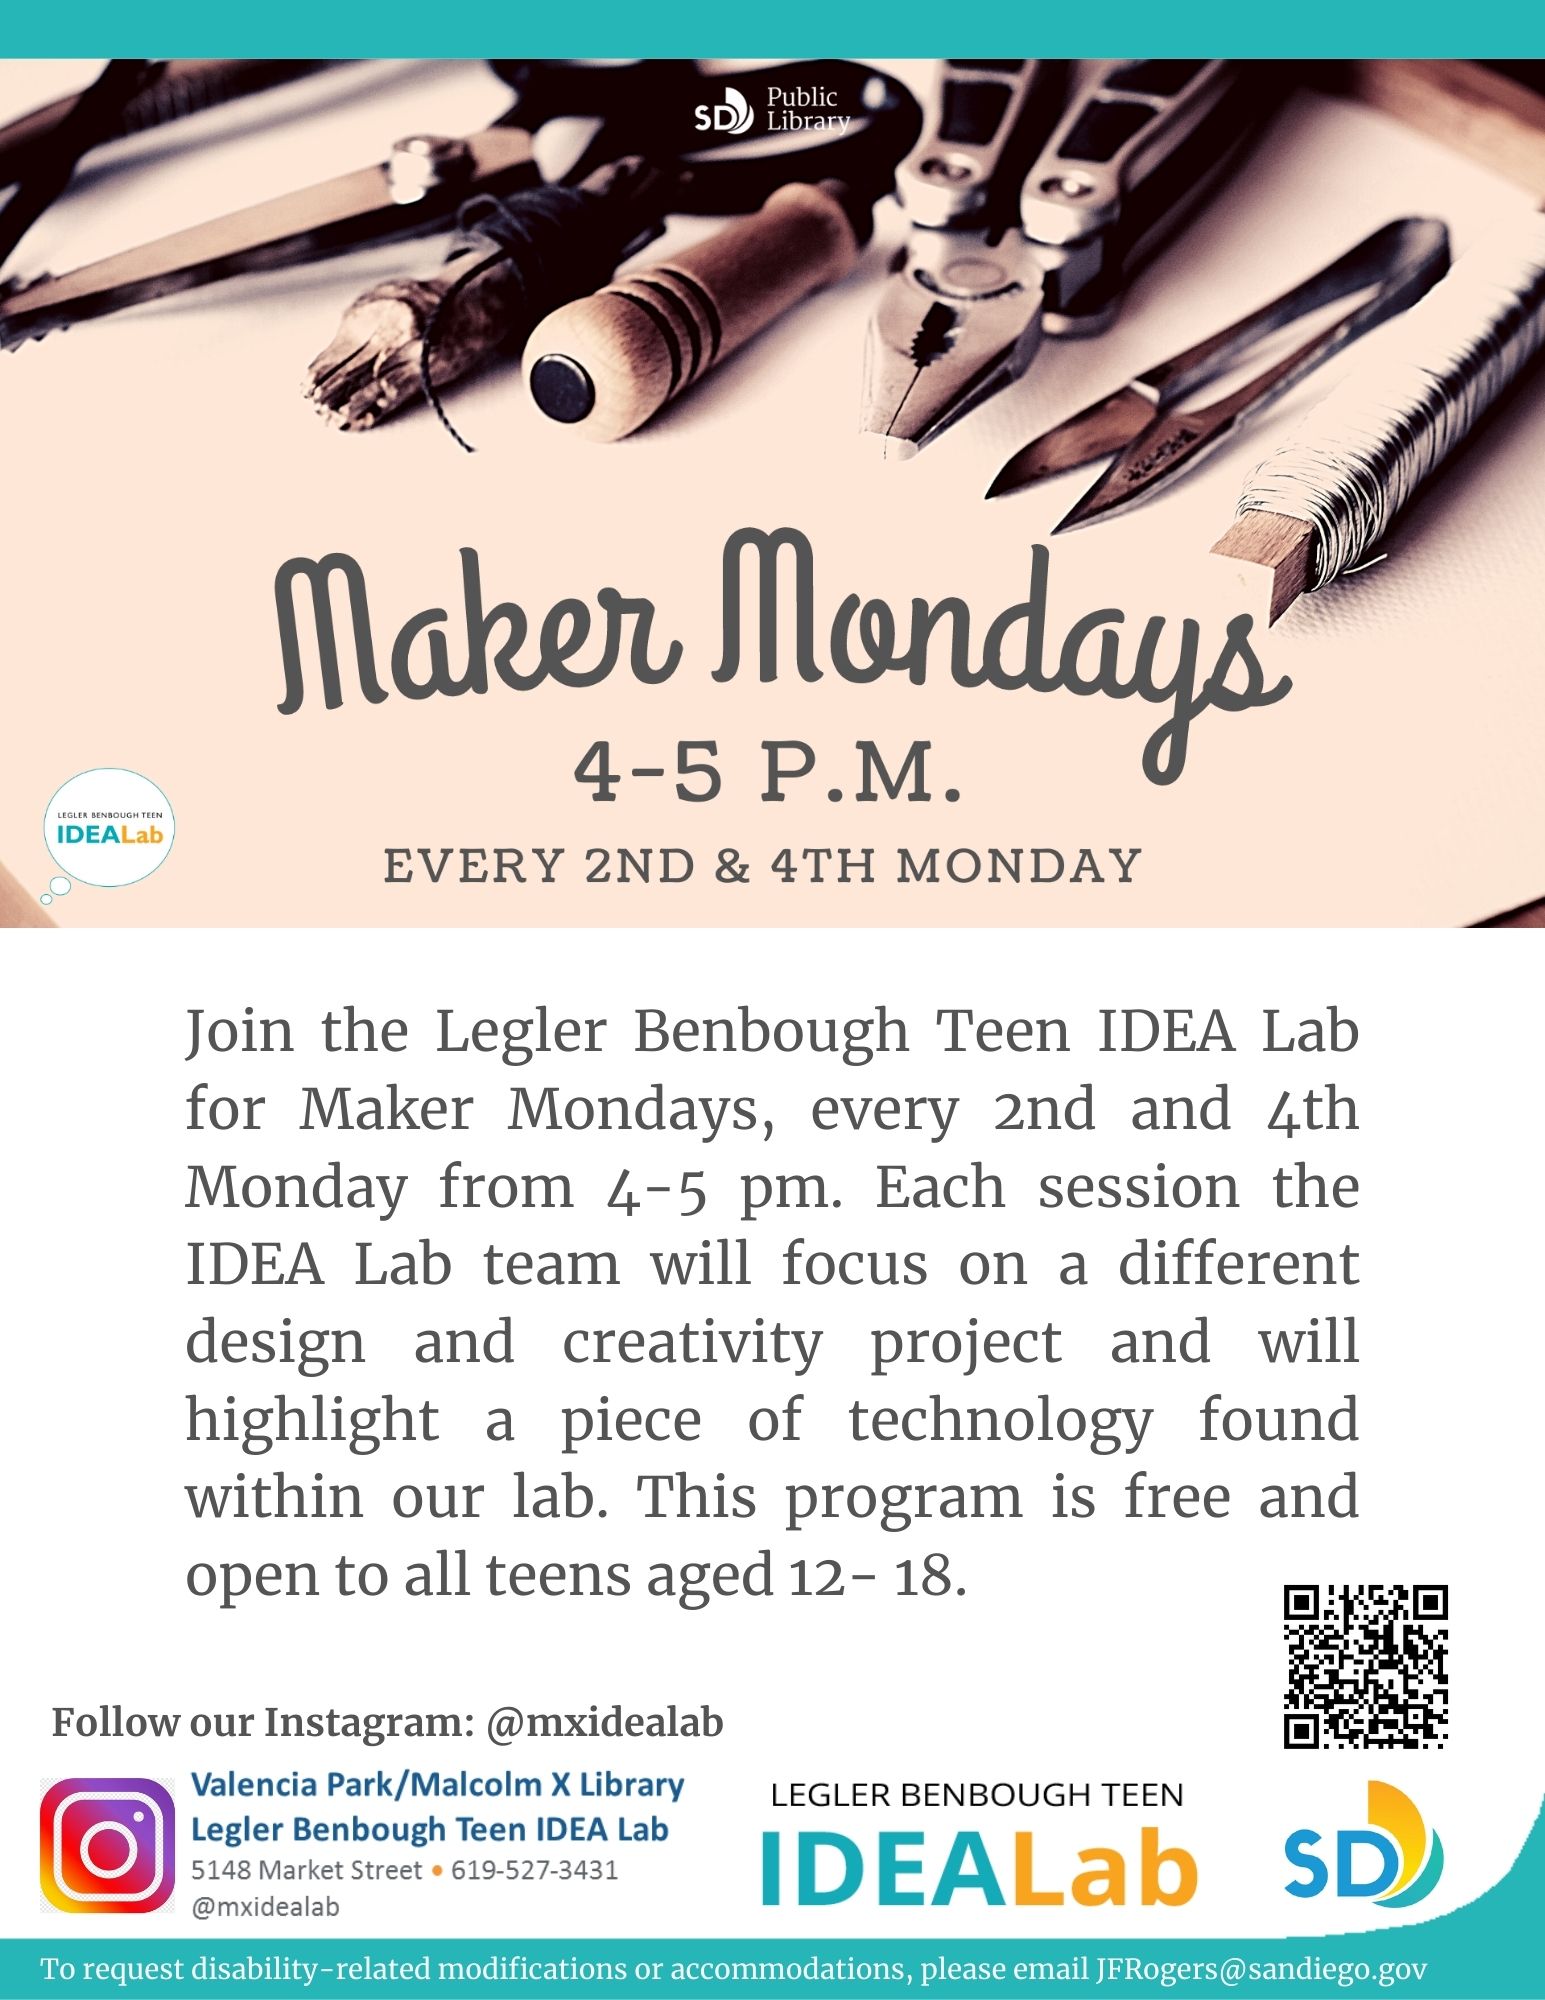 Maker Monday is on every 2nd and 4th Monday of the month starting at 4pm.